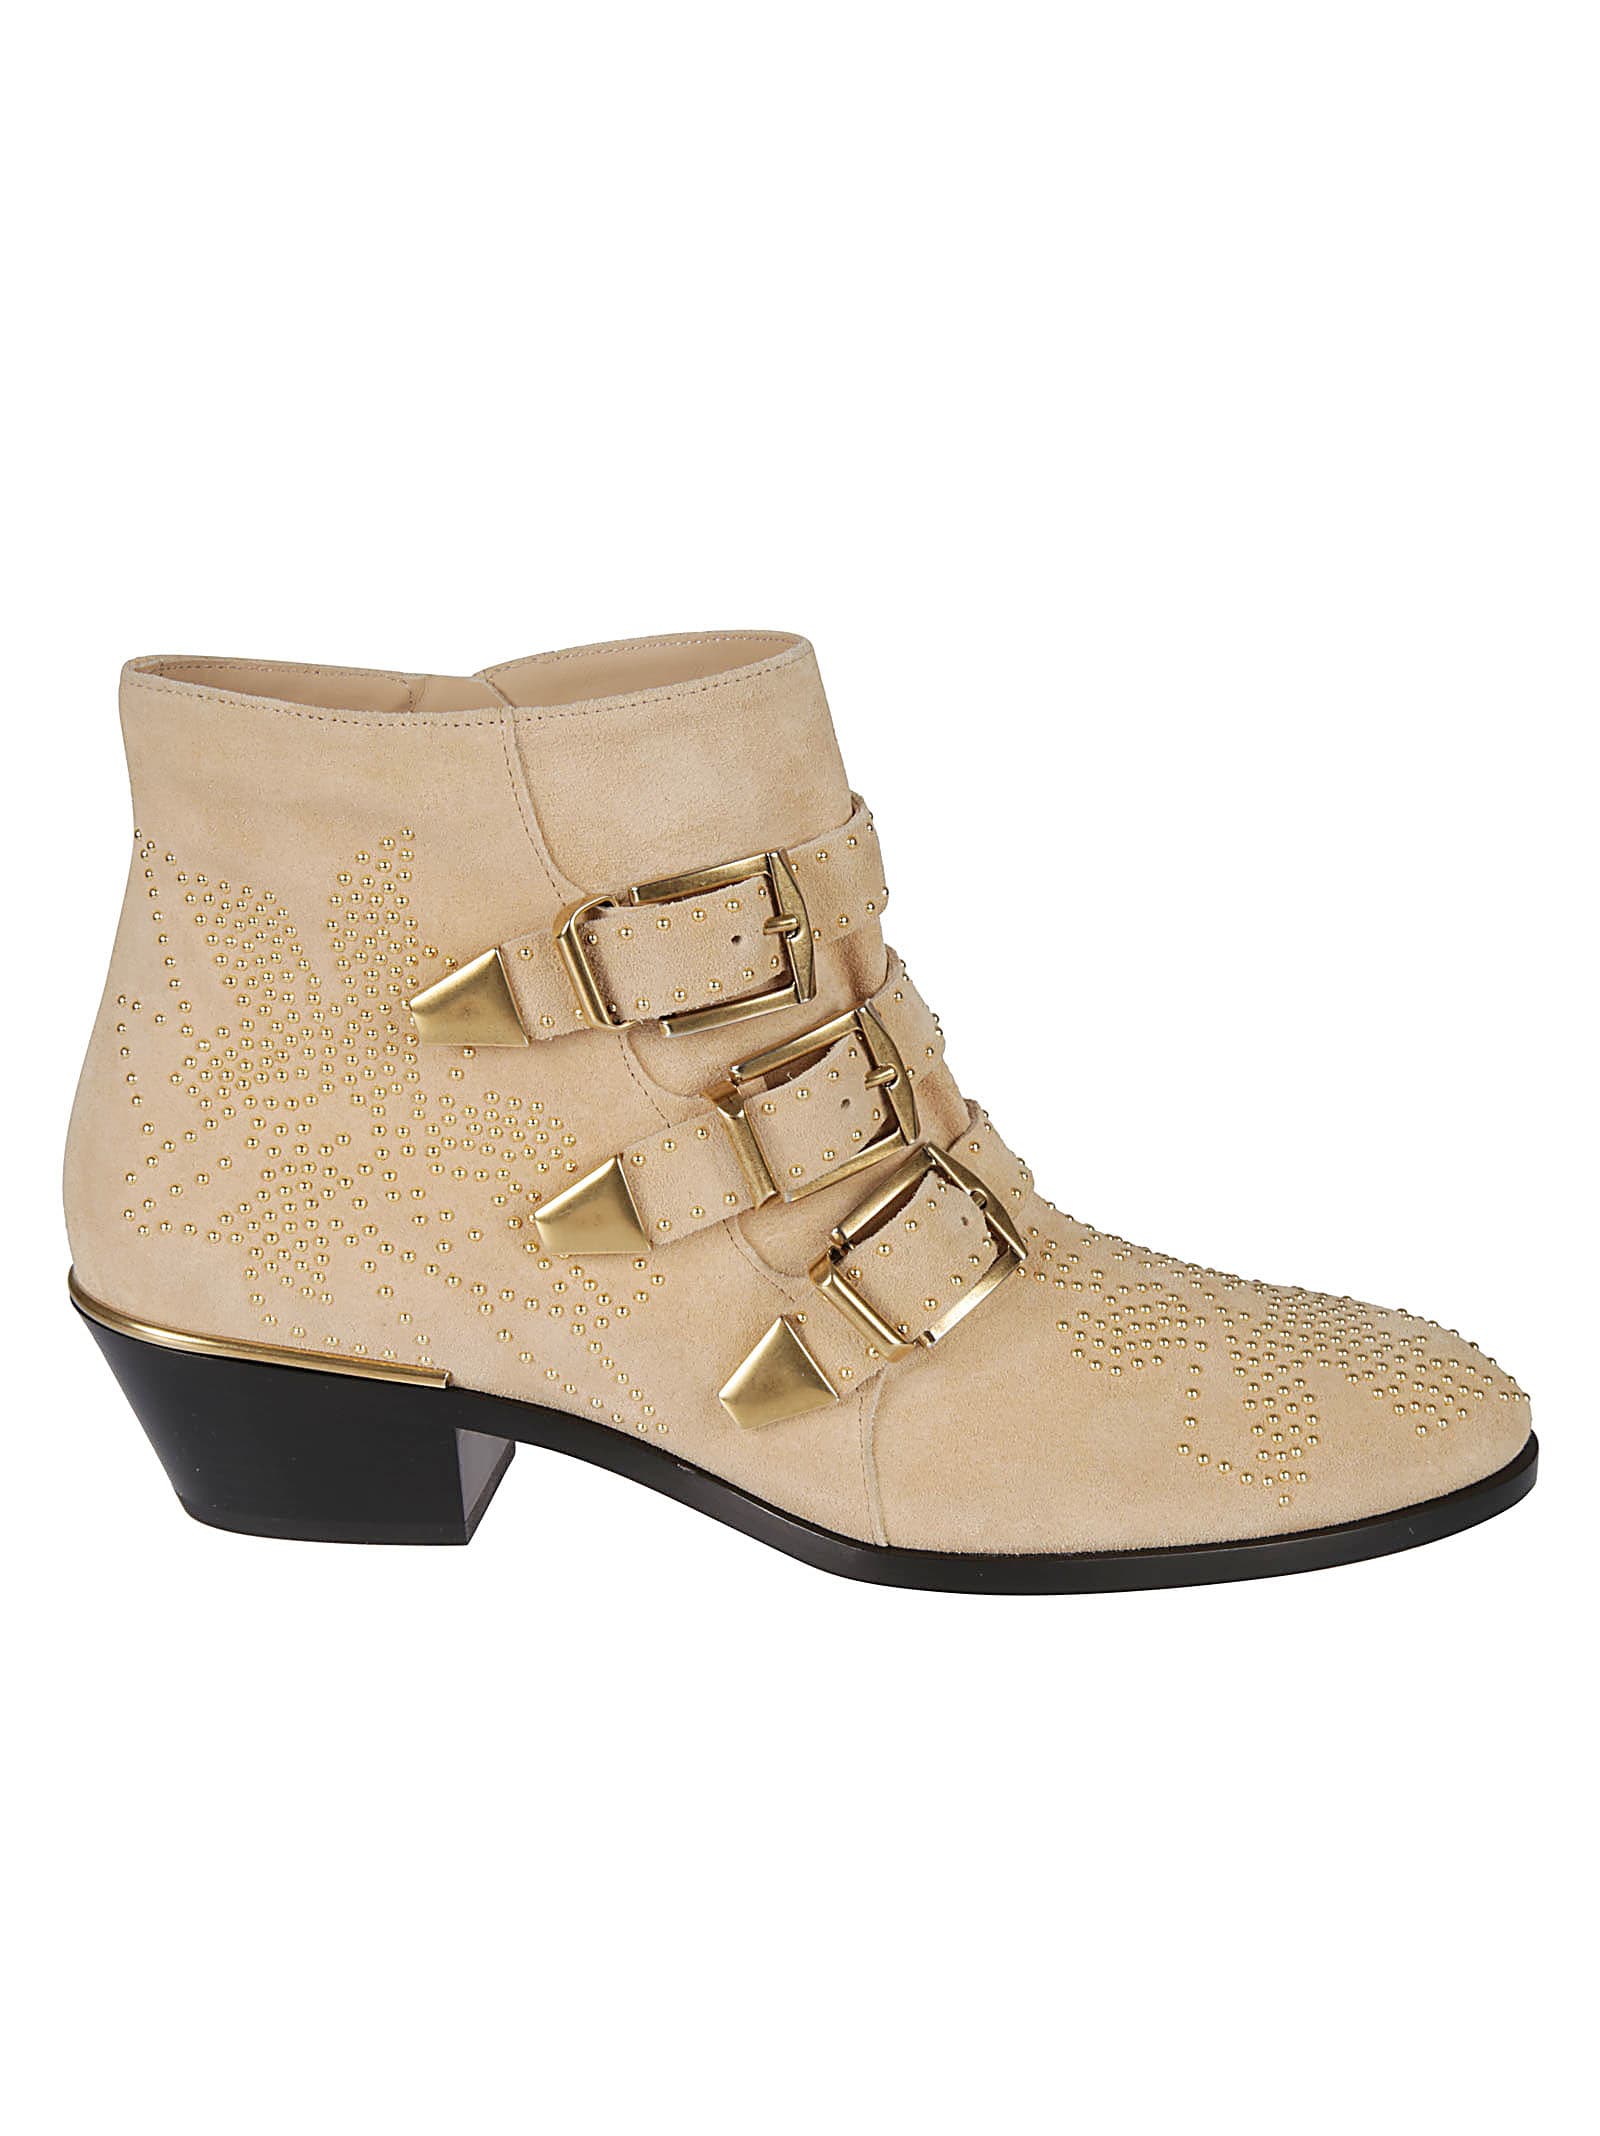 Chloé Susanna Boots In Lovely Beige